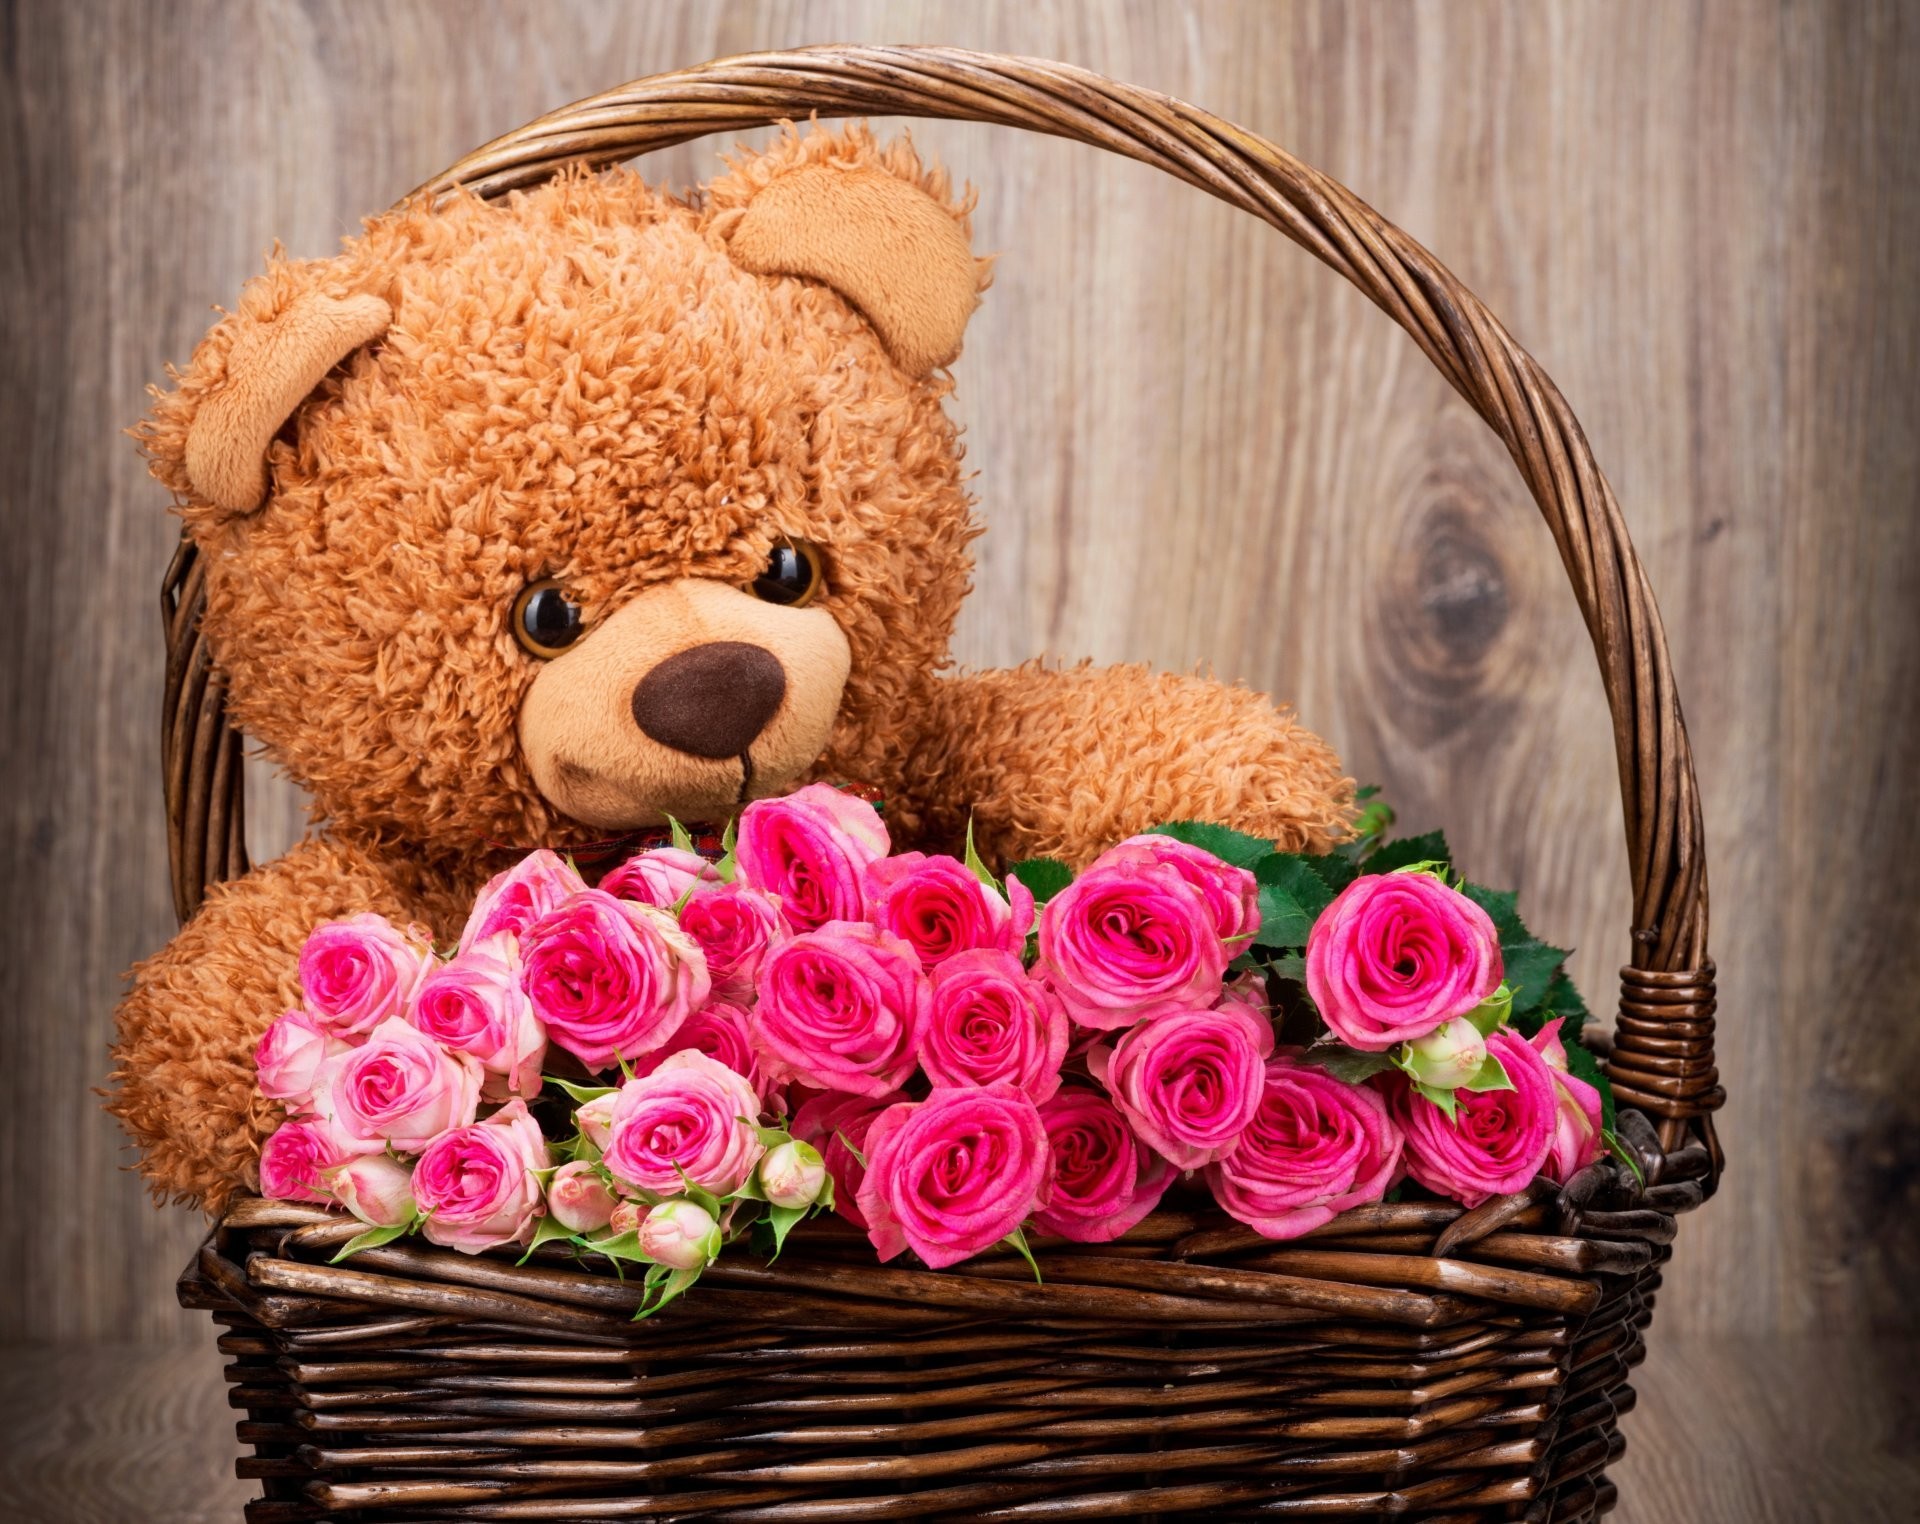 Teddy Bear Love Wallpaper (45+ pictures)